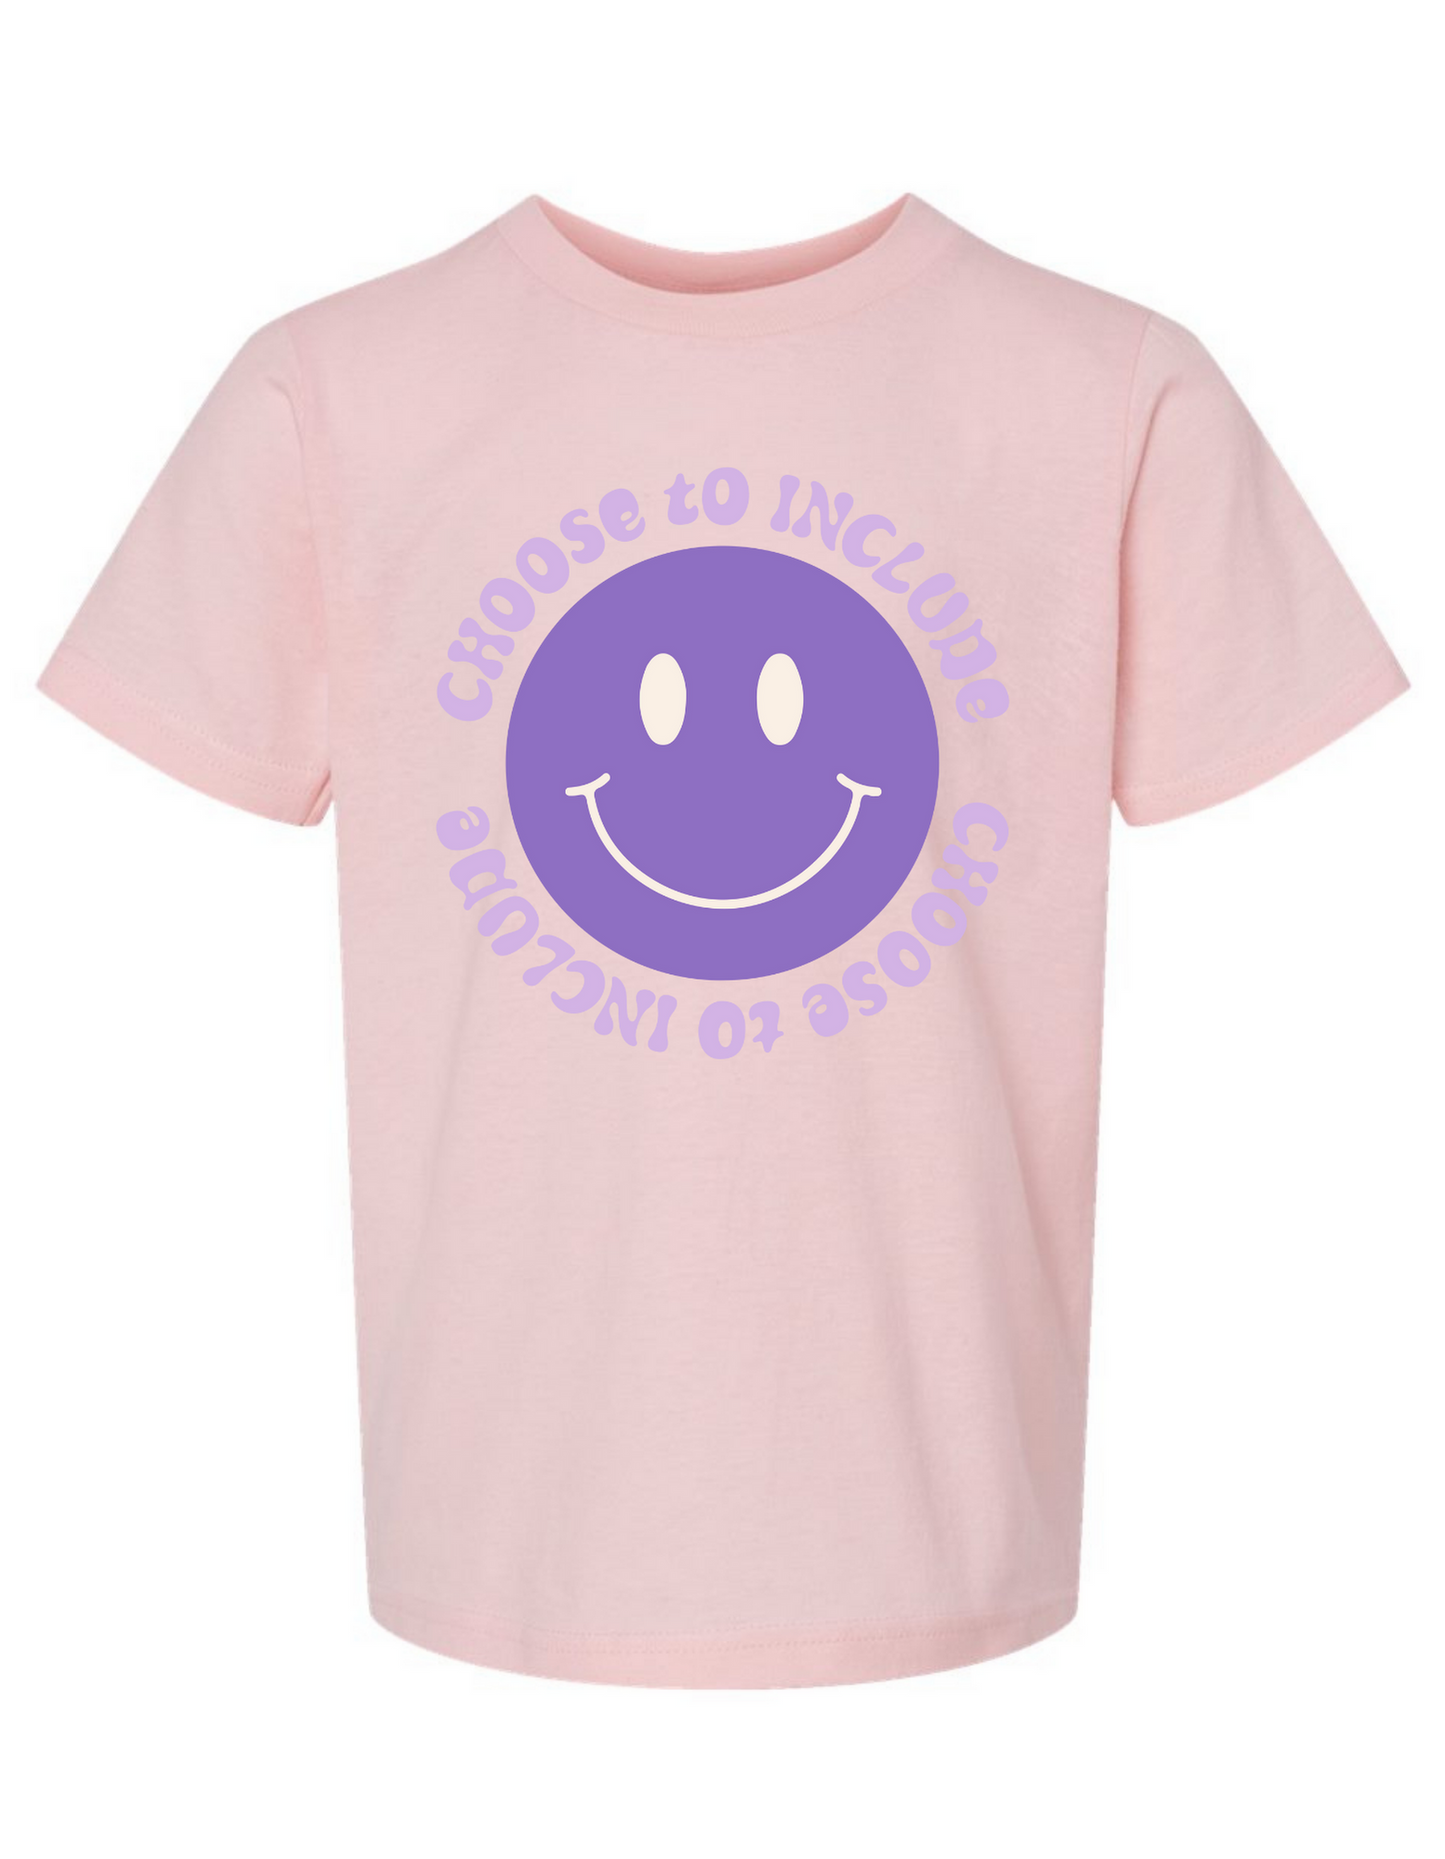 Kids Smiley Choose to Include Tee - Light Pink